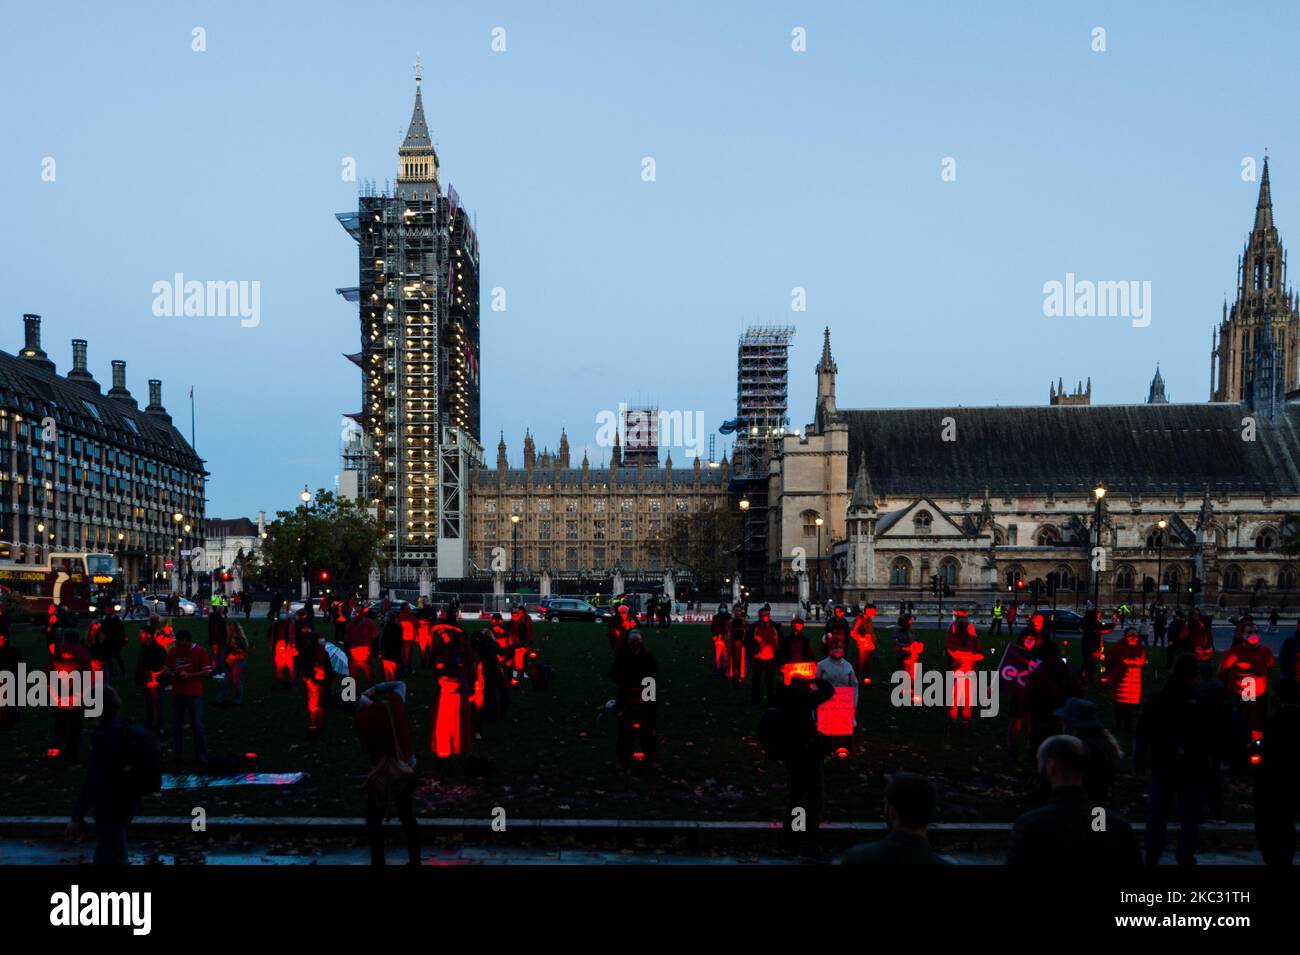 A socially distanced line of #WeMakeEvents supporters and technical crew congregate in the Parliament Square to take their bow following the week’s creative activations on October 31, 2020 in London, United Kingdom. The aim is to showcase the breadth of live events and the technical supply chain that support them, and that live events need government policies in place to help people to return to work and further financial aid until everyone can return. The protest has been organised by We Stand As One #WeMakeEvents who are calling for meaningful support from the Government until the industry i Stock Photo